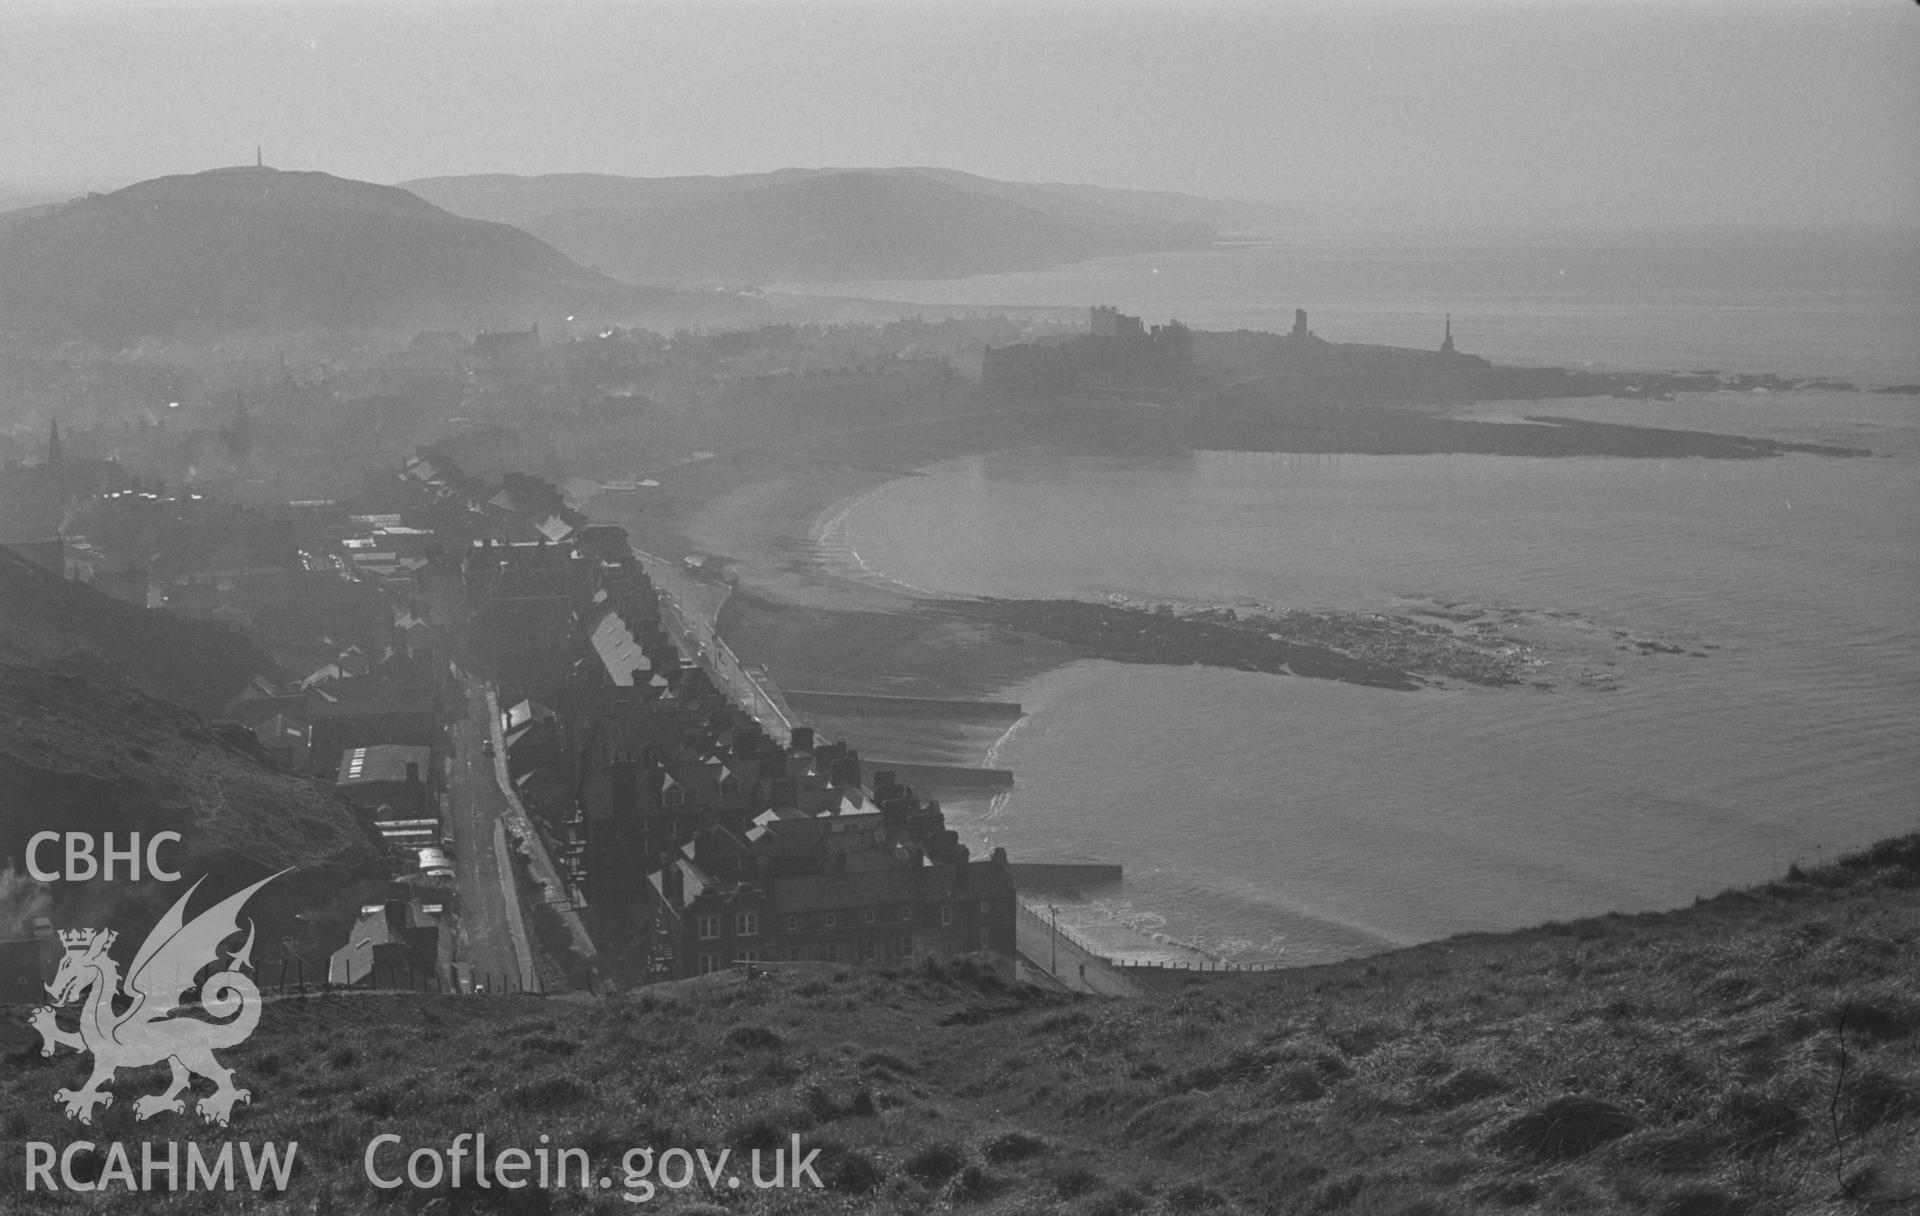 Black and White photograph showing view of Aberystwyth from Constitution Hill. Photographed by Arthur Chater in December 1962.